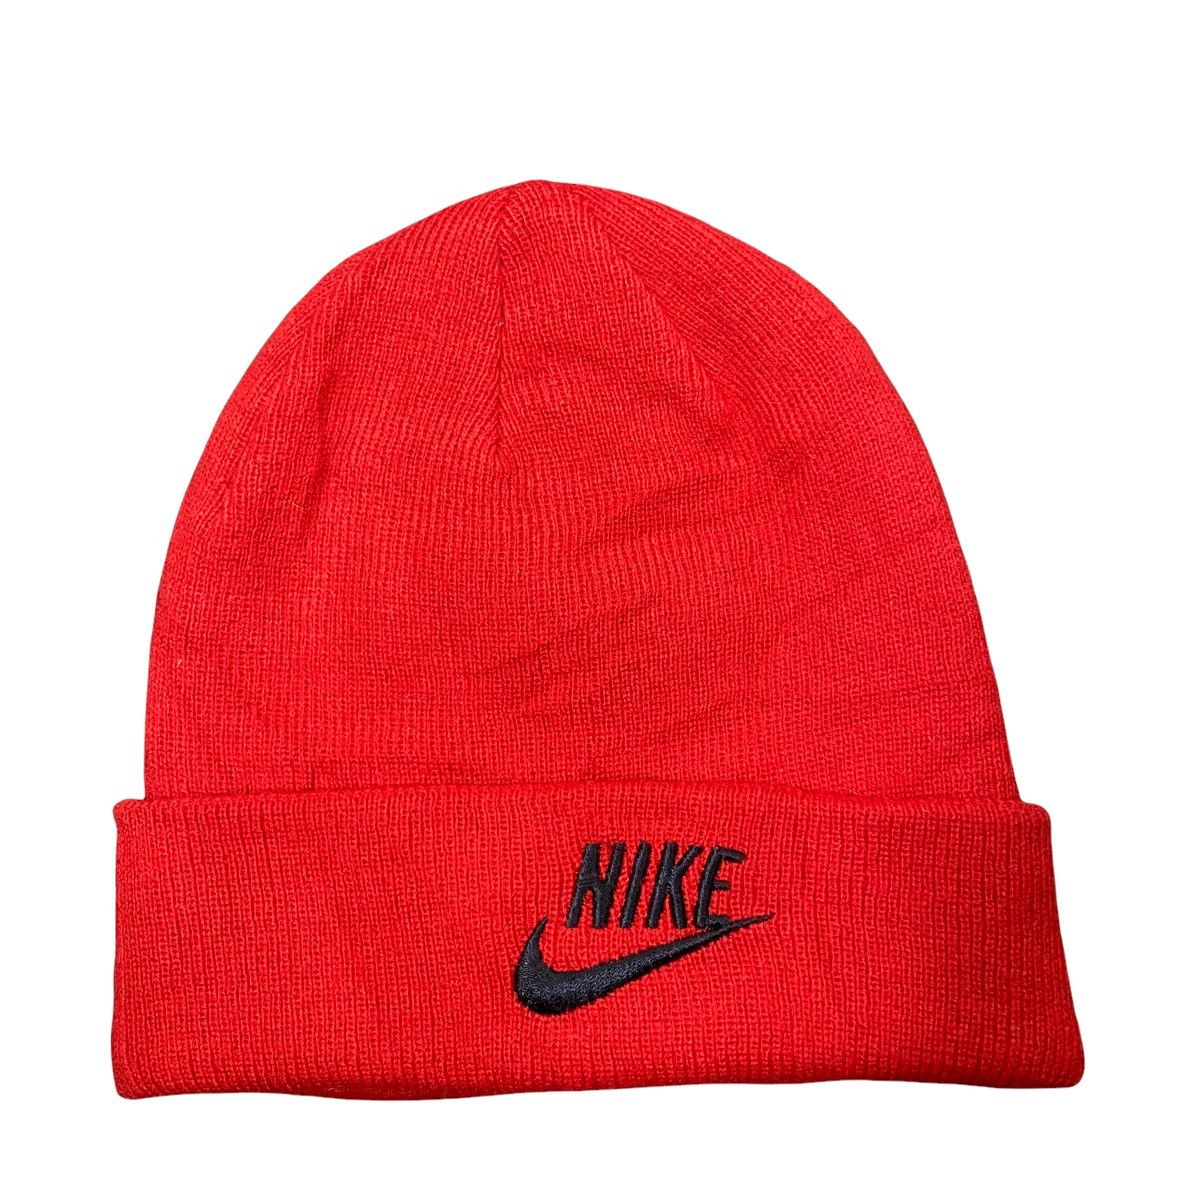 Vintage 90s Nike Embroidery Beanie Unisex Red Colour - 5